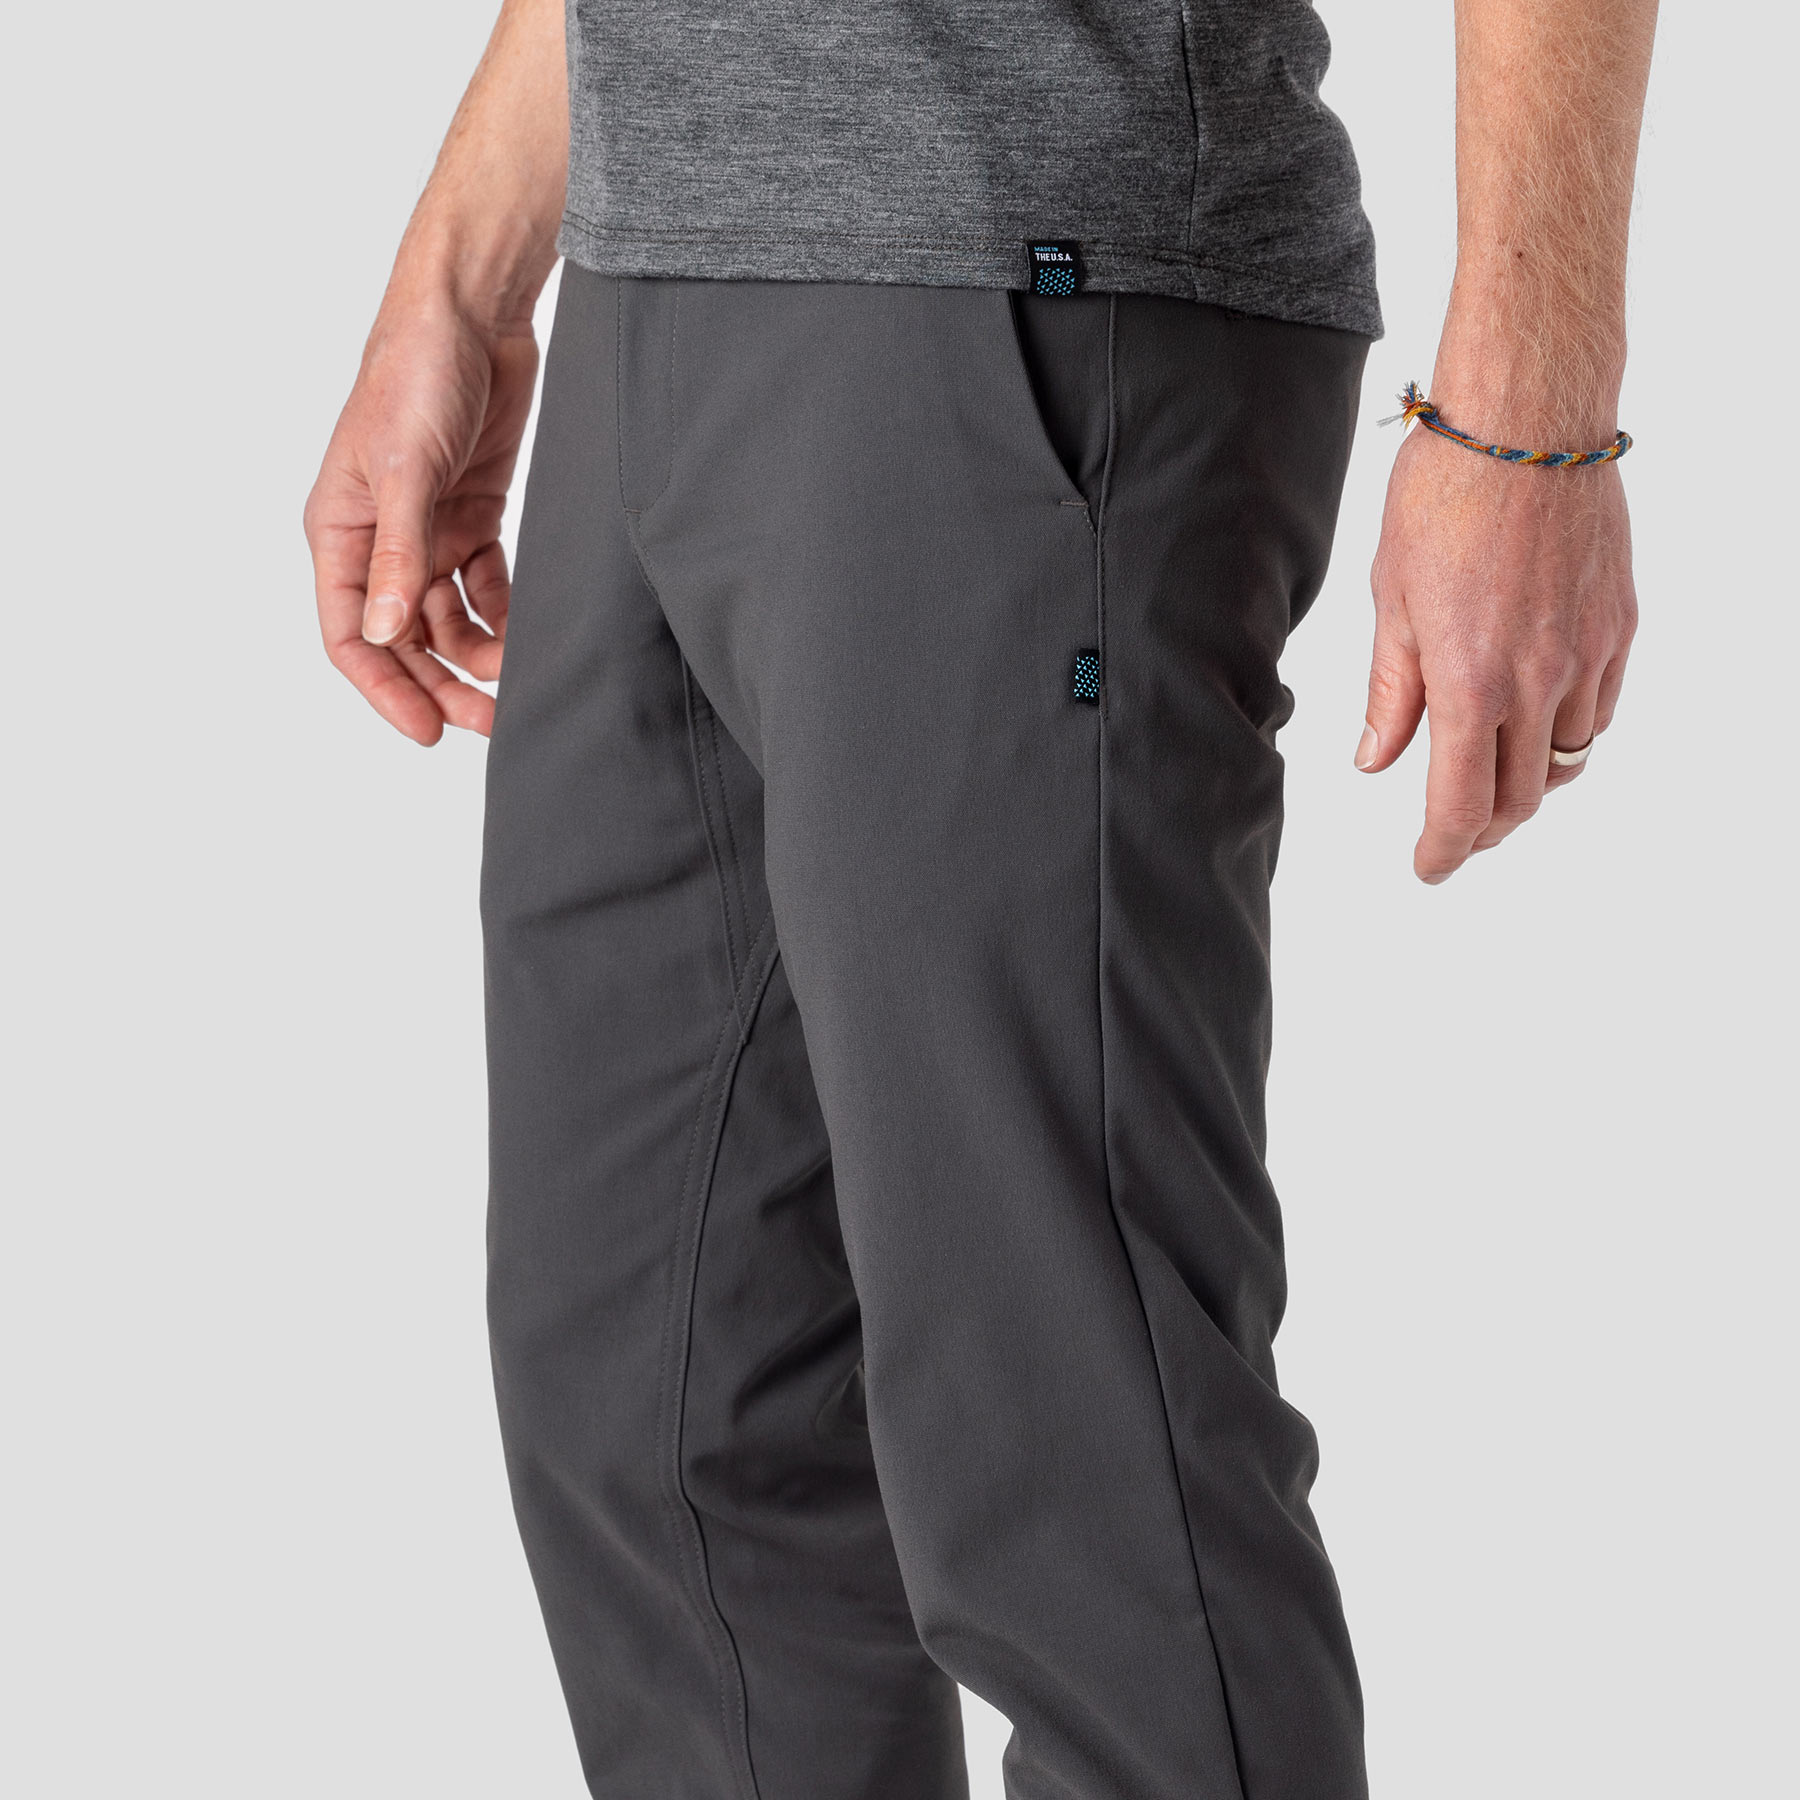 Ornot's Mission Pants Look Great for Commuting ... Not Bikerumor